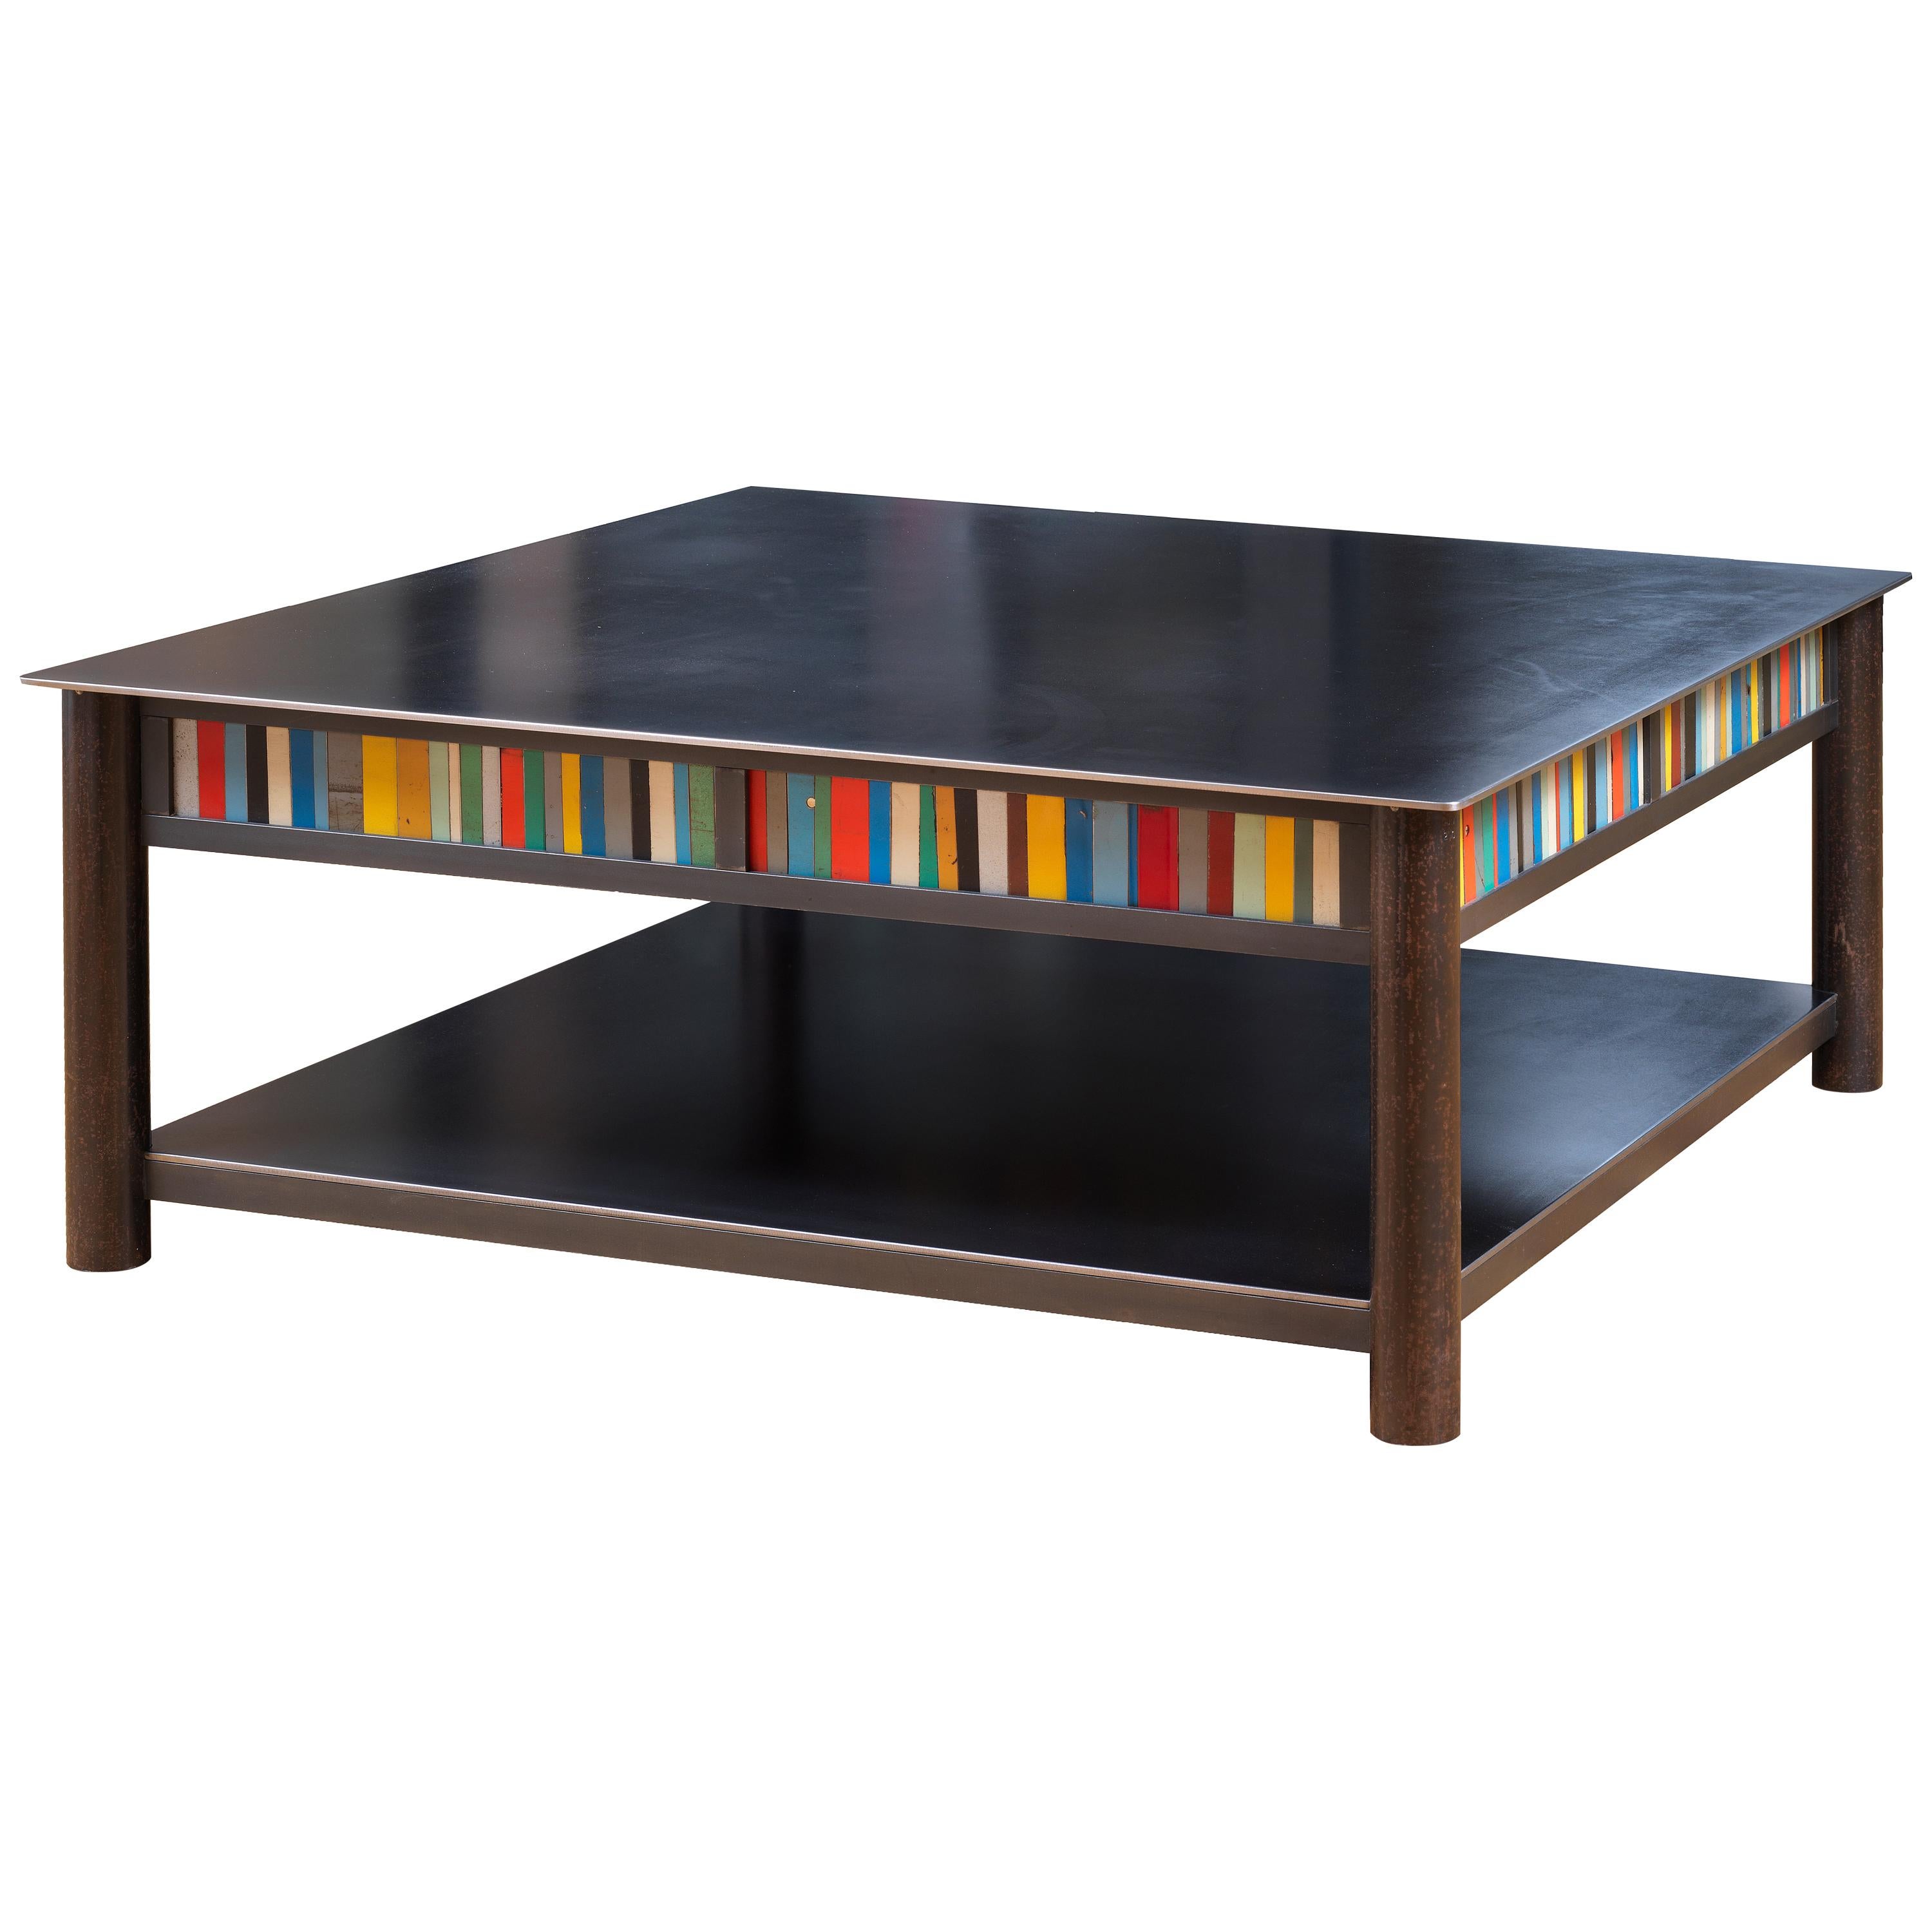 Jim Rose Steel Furniture - Square Coffee Table with Shelf and Multi-Color Panels